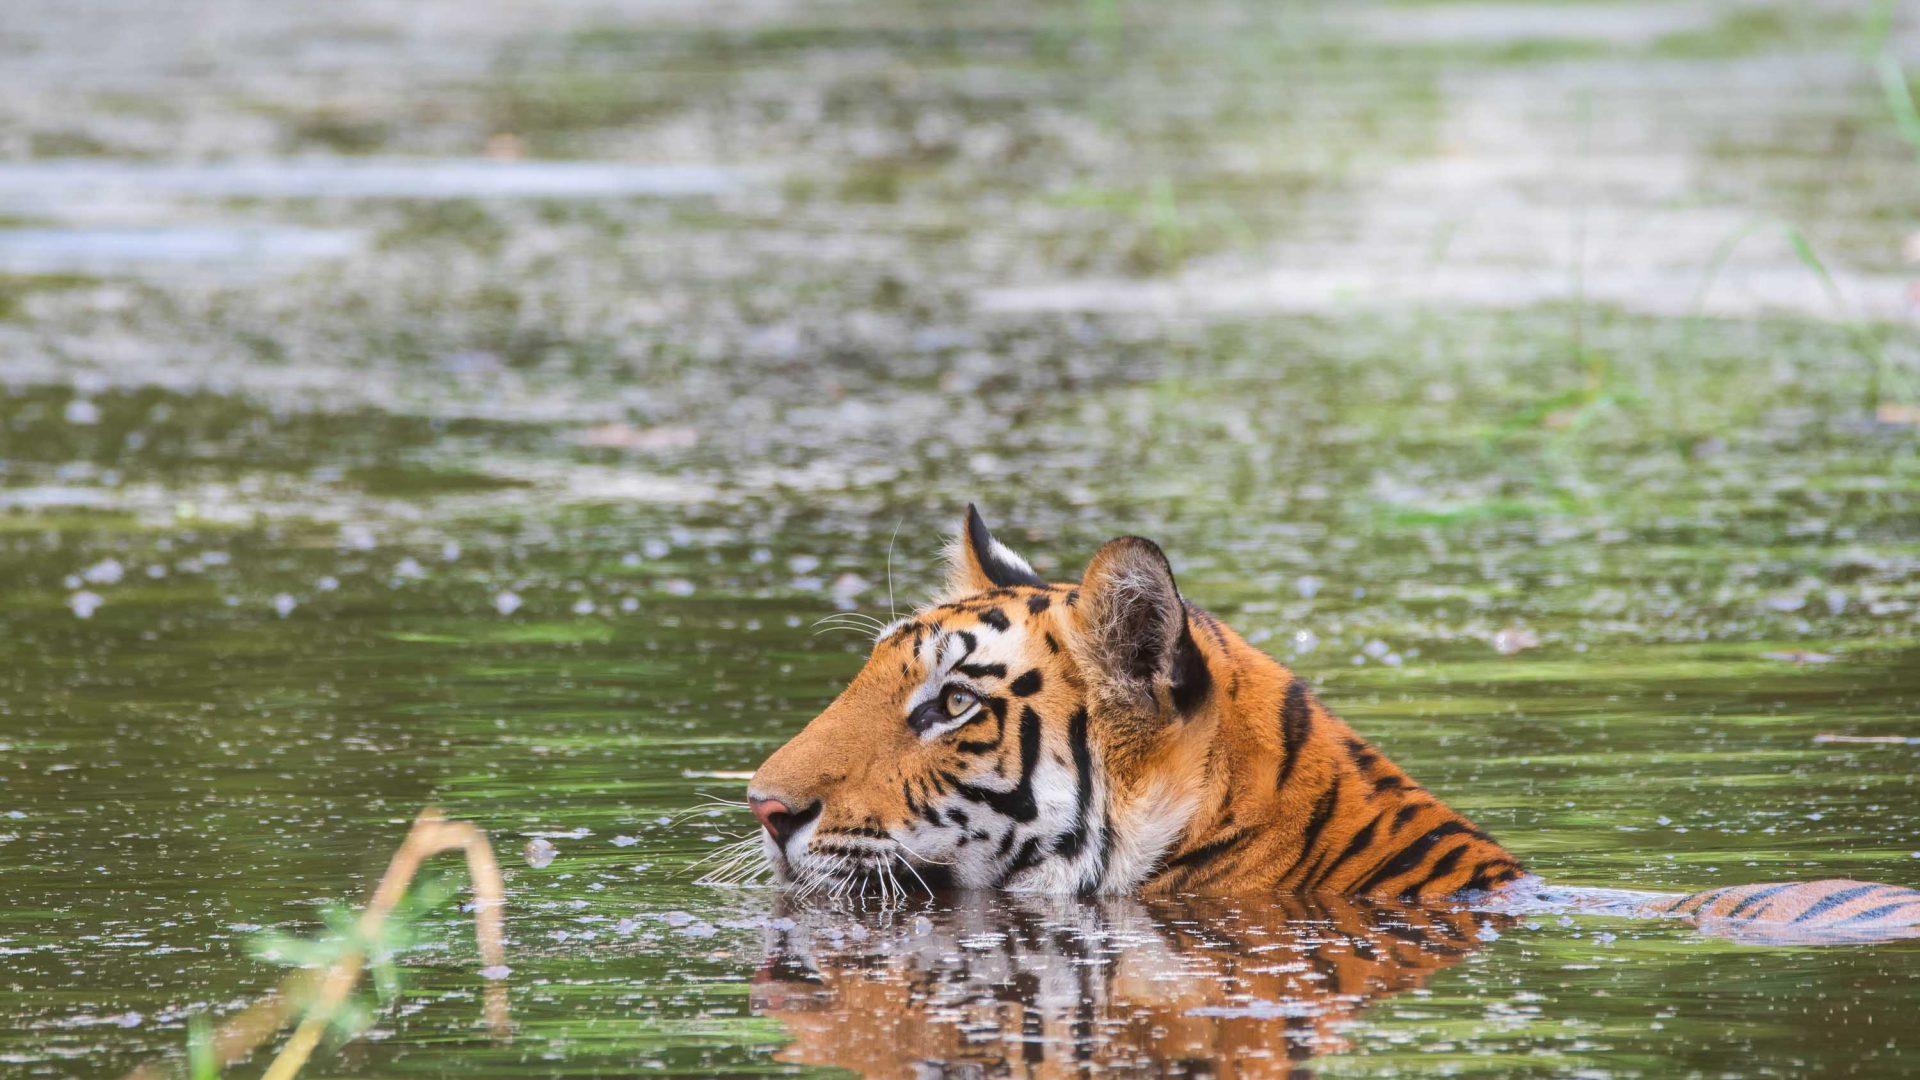 A tiger in a body of water.